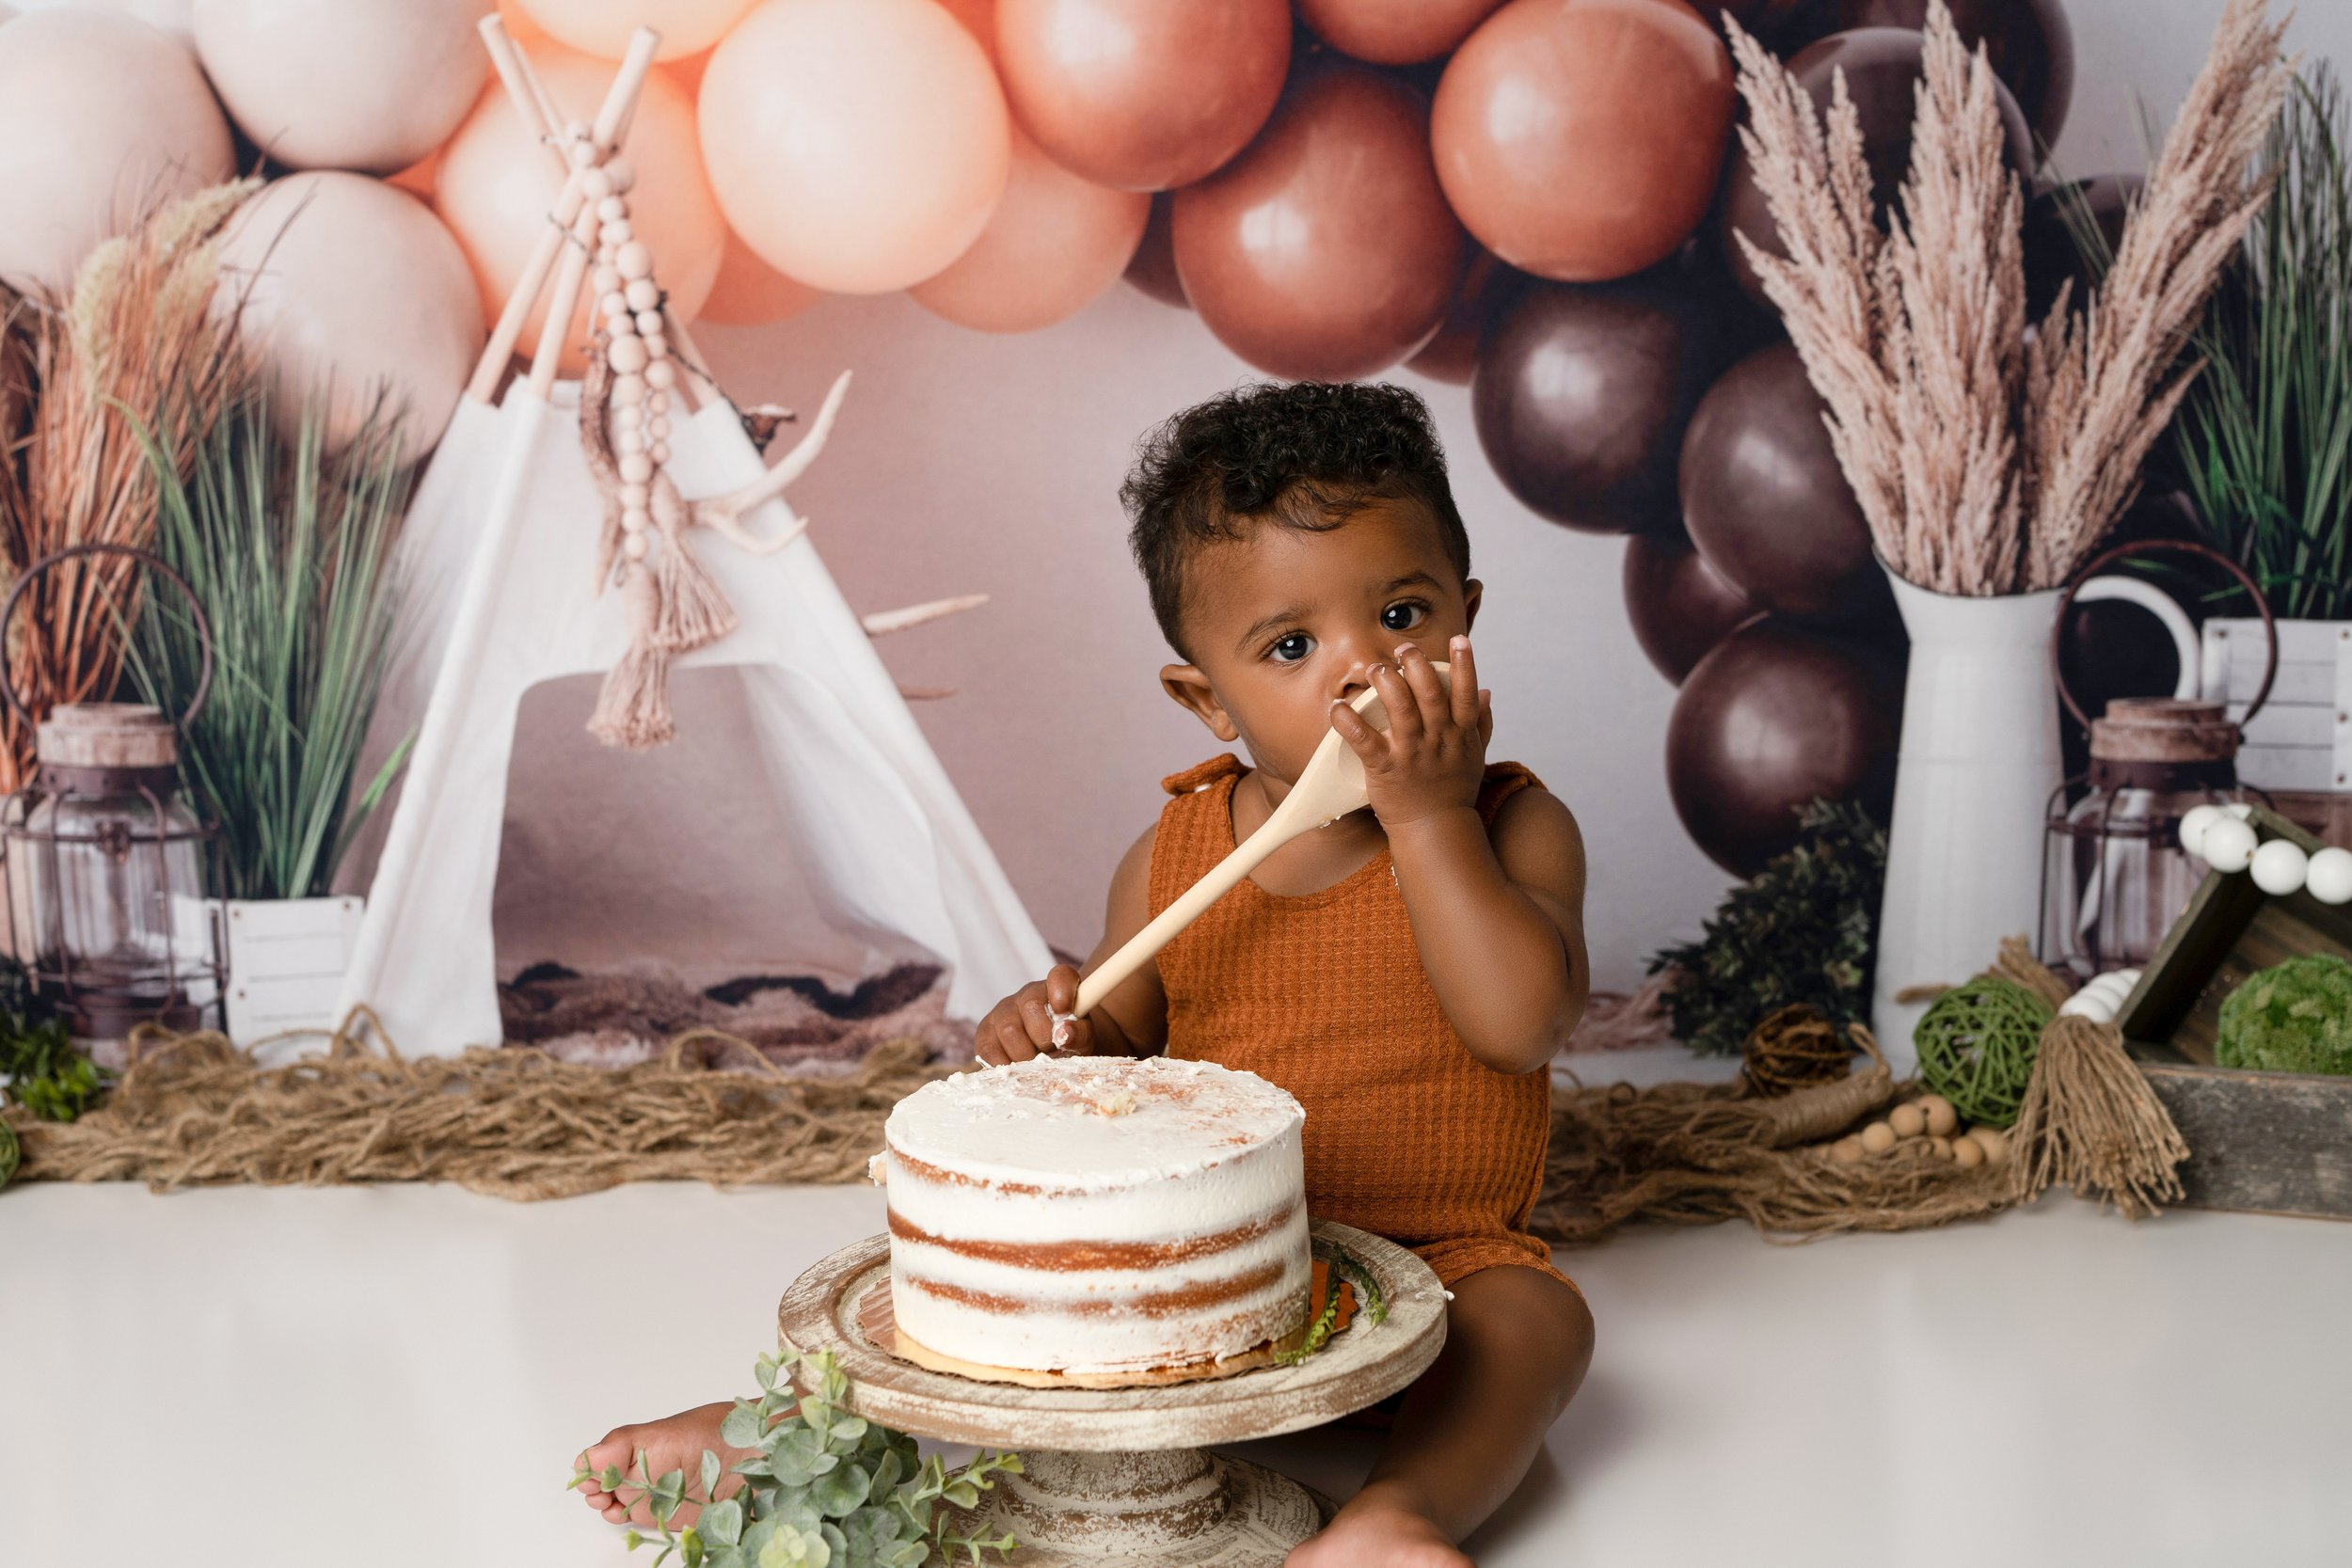 ONE for First Birthday Photo Shoot for Babies and Kids - Wooden